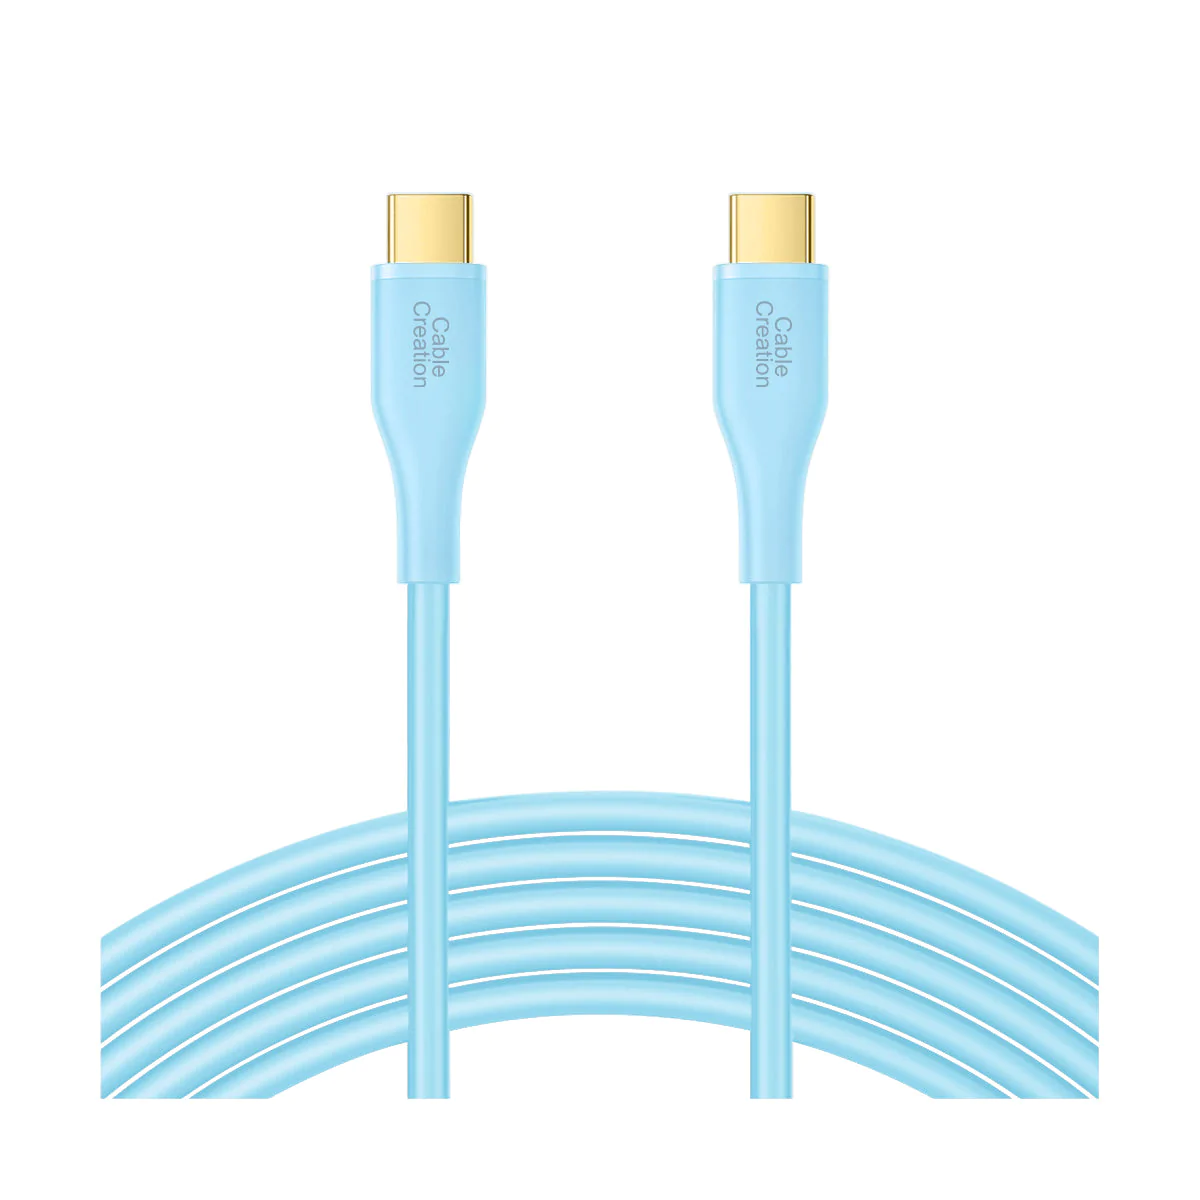 What Are the Benefits of USB C Data Cable?